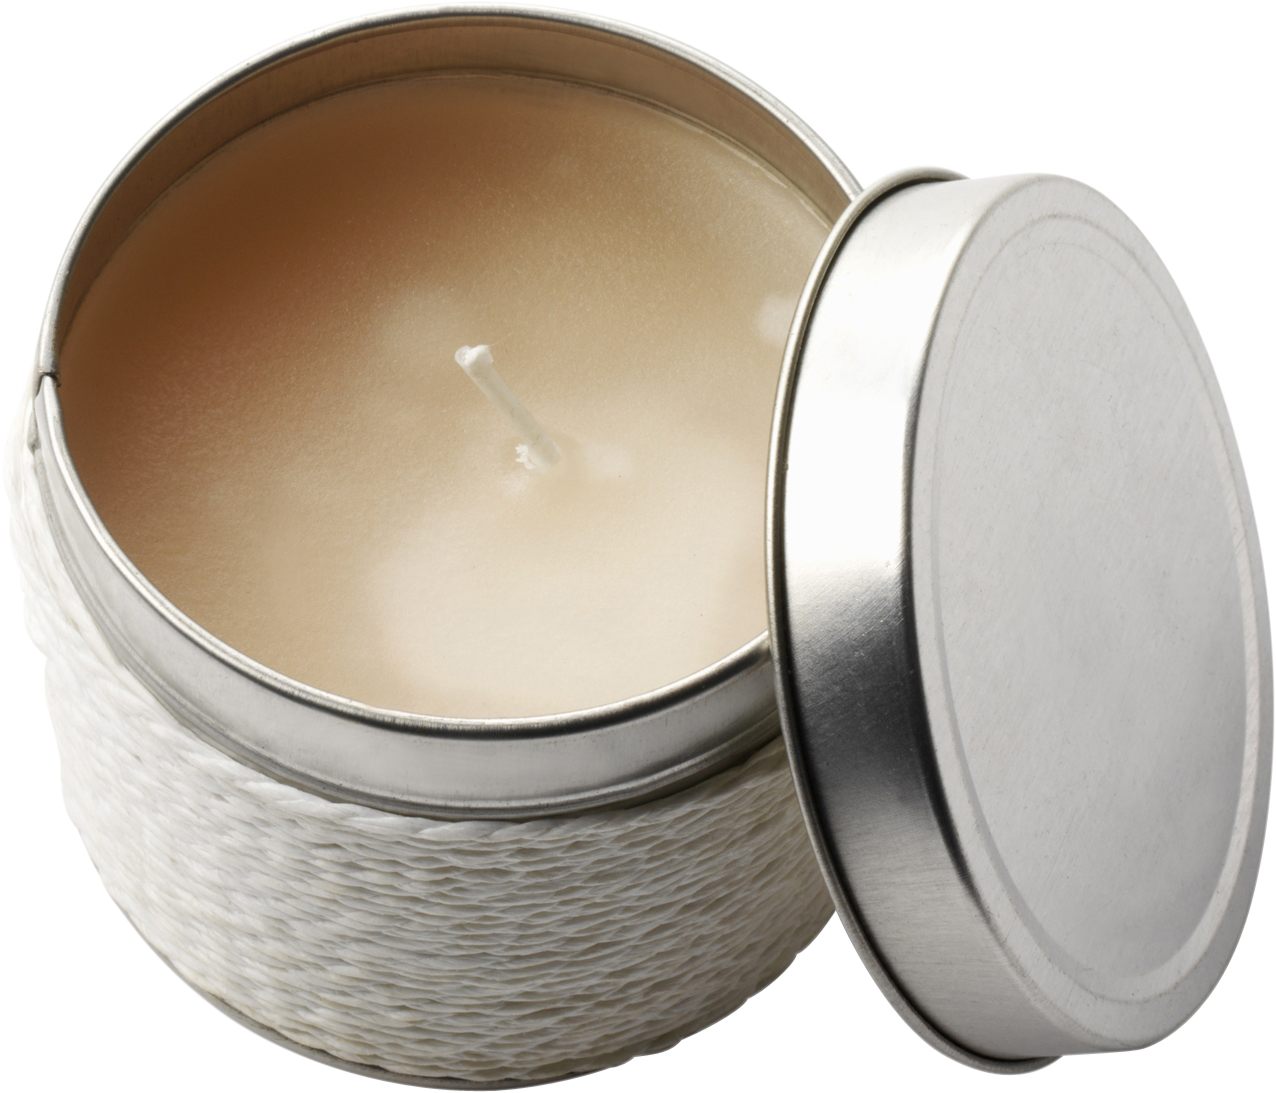 001361 002999999 3d090 top pro01 fal - Fragranced candle in a tin